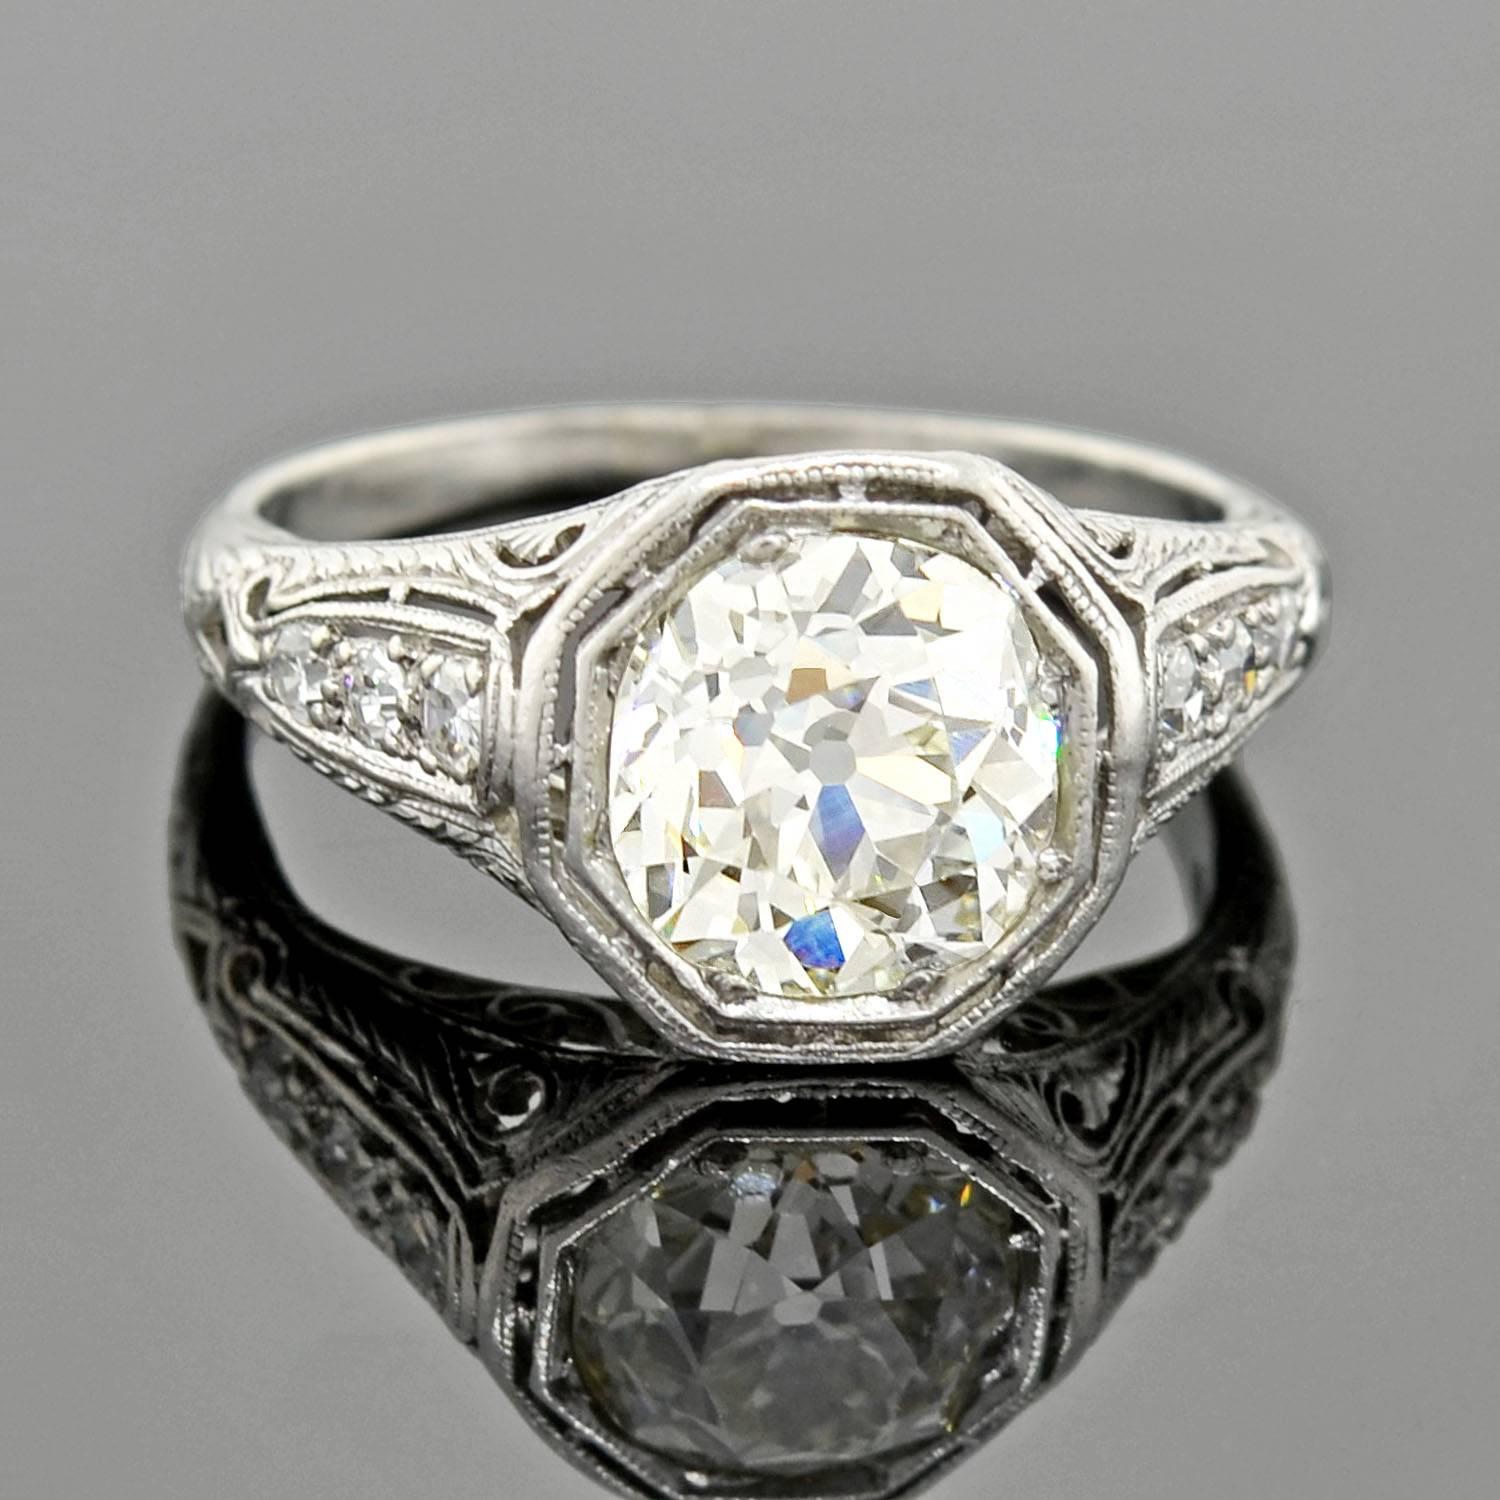 A simply spectacular diamond engagement ring from the Art Deco (ca1920) era! This outstanding ring is crafted in platinum and boasts an impressive and detailed design. At the center of the octagonal-shaped face is a sparkling old Mine Cut diamond,